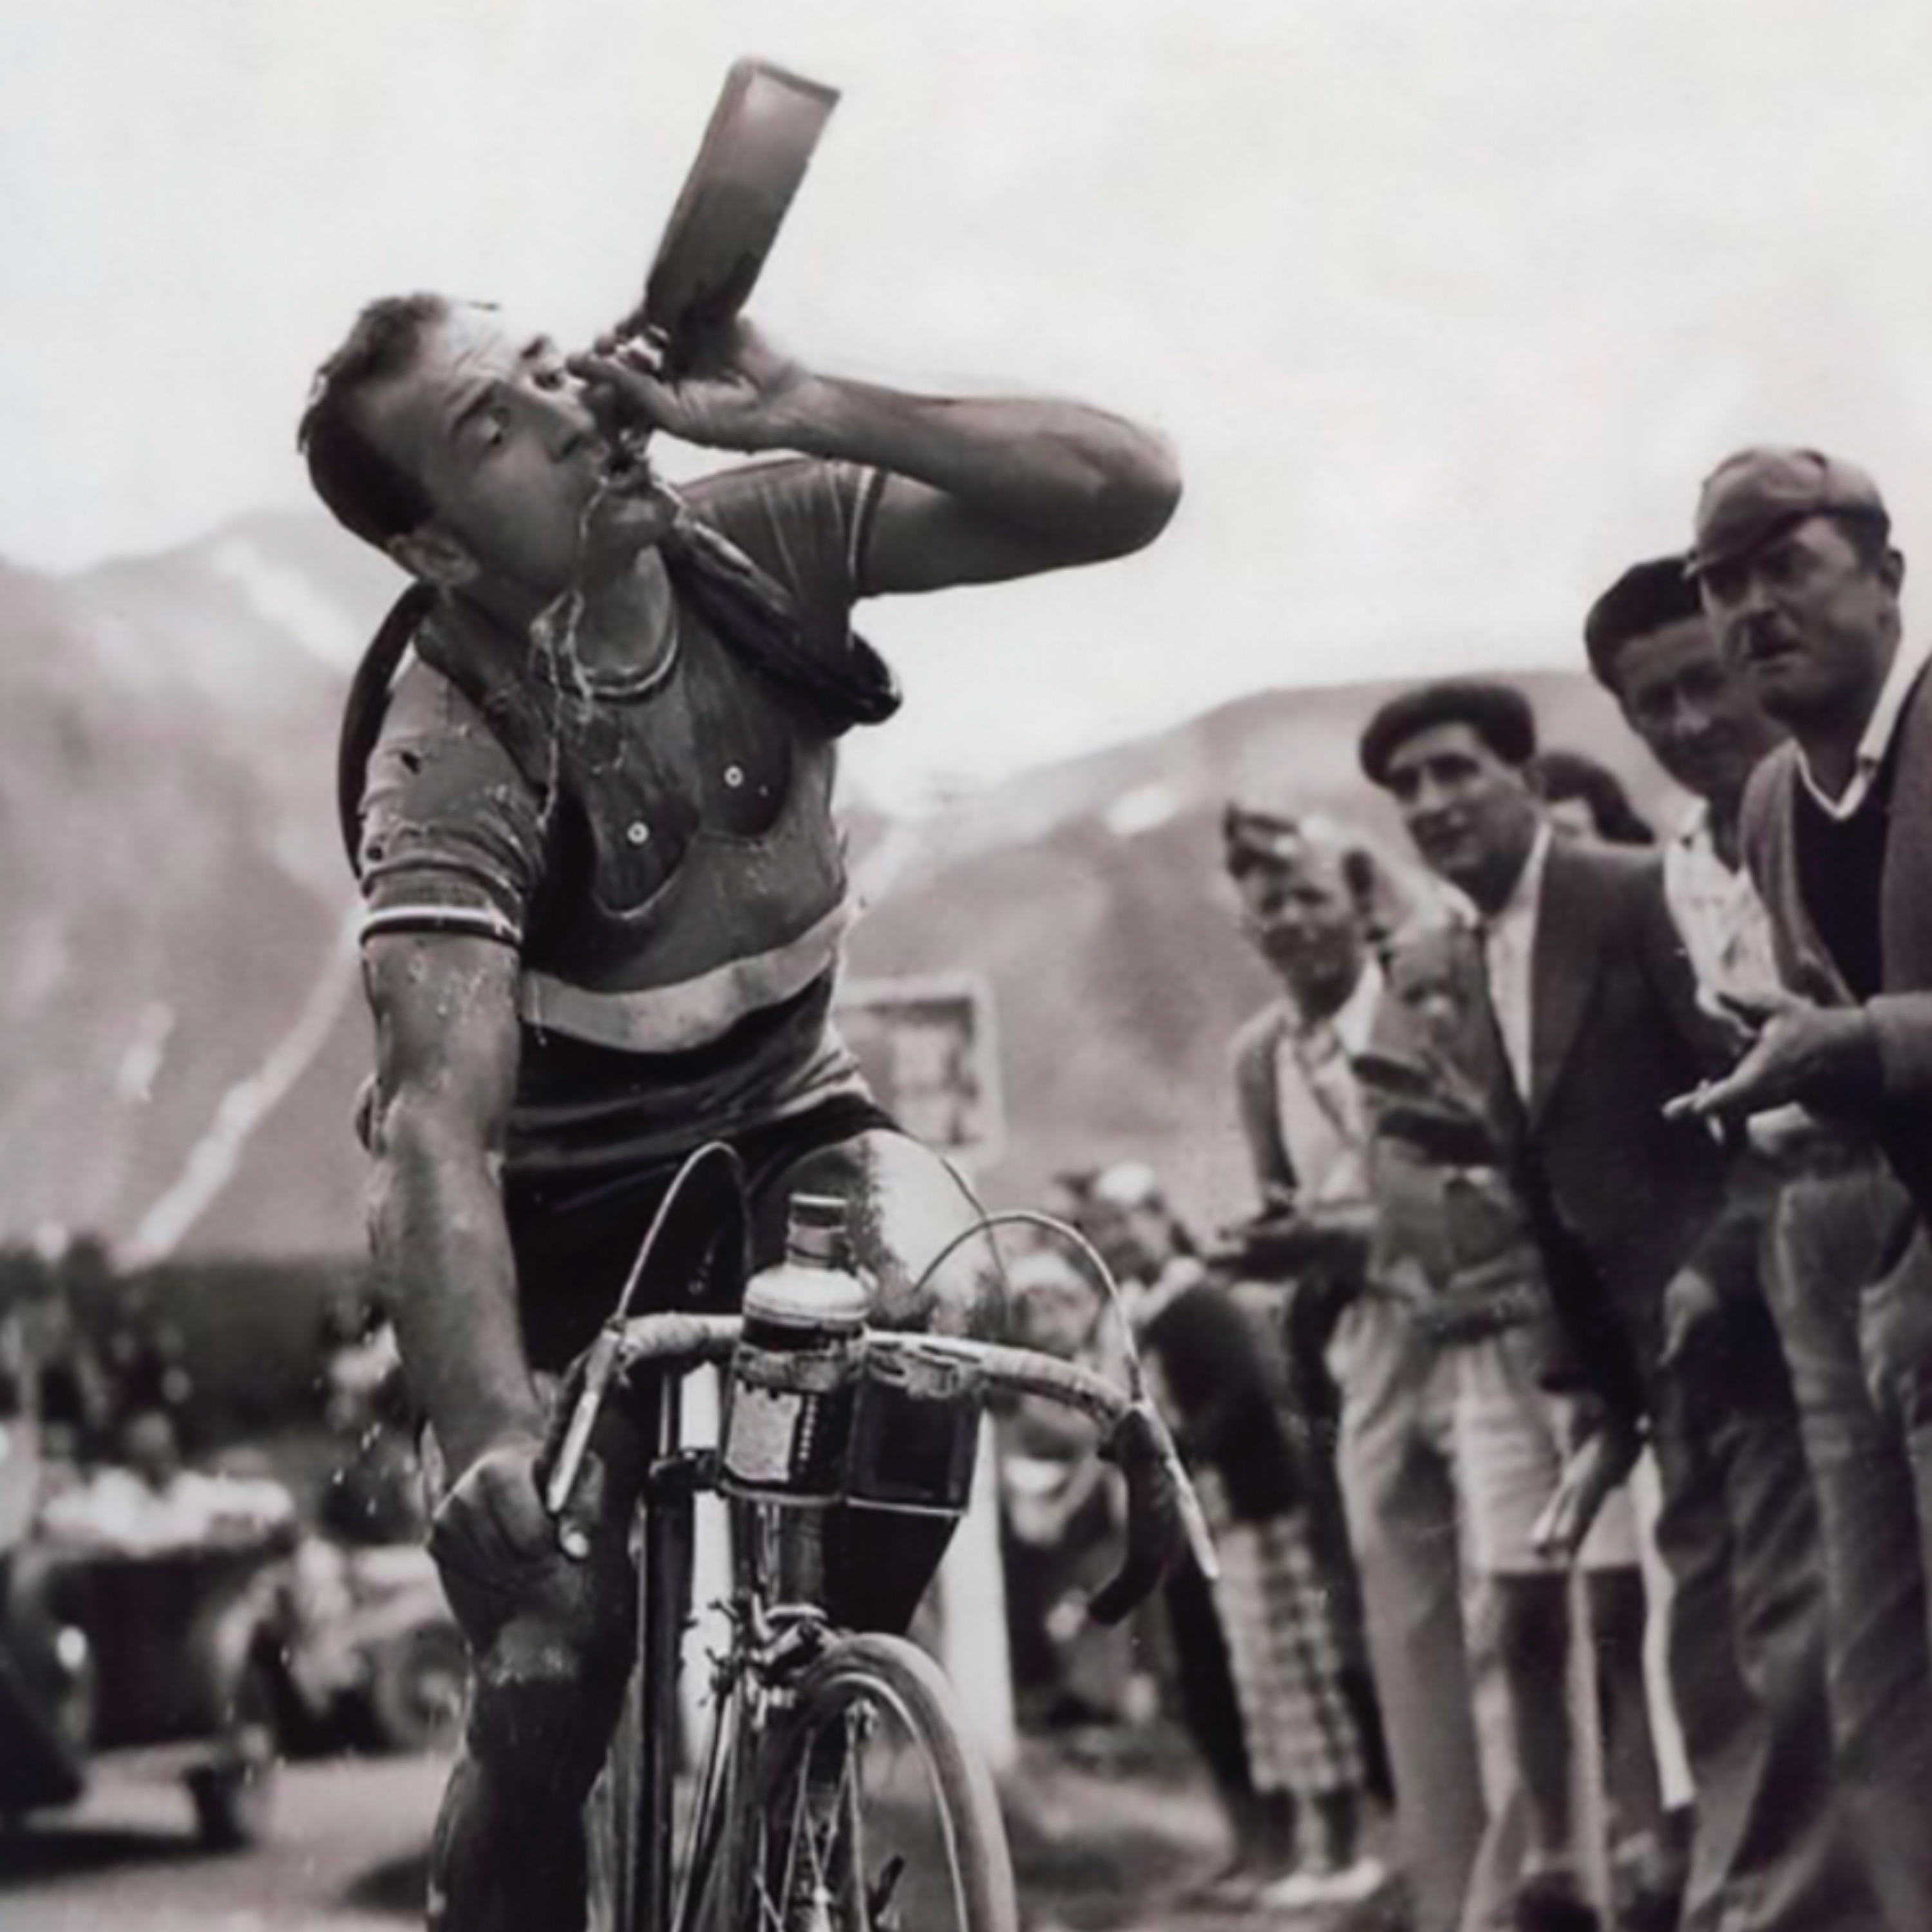 ‘You’re all murderers’: the sadistic story of the Tour de France